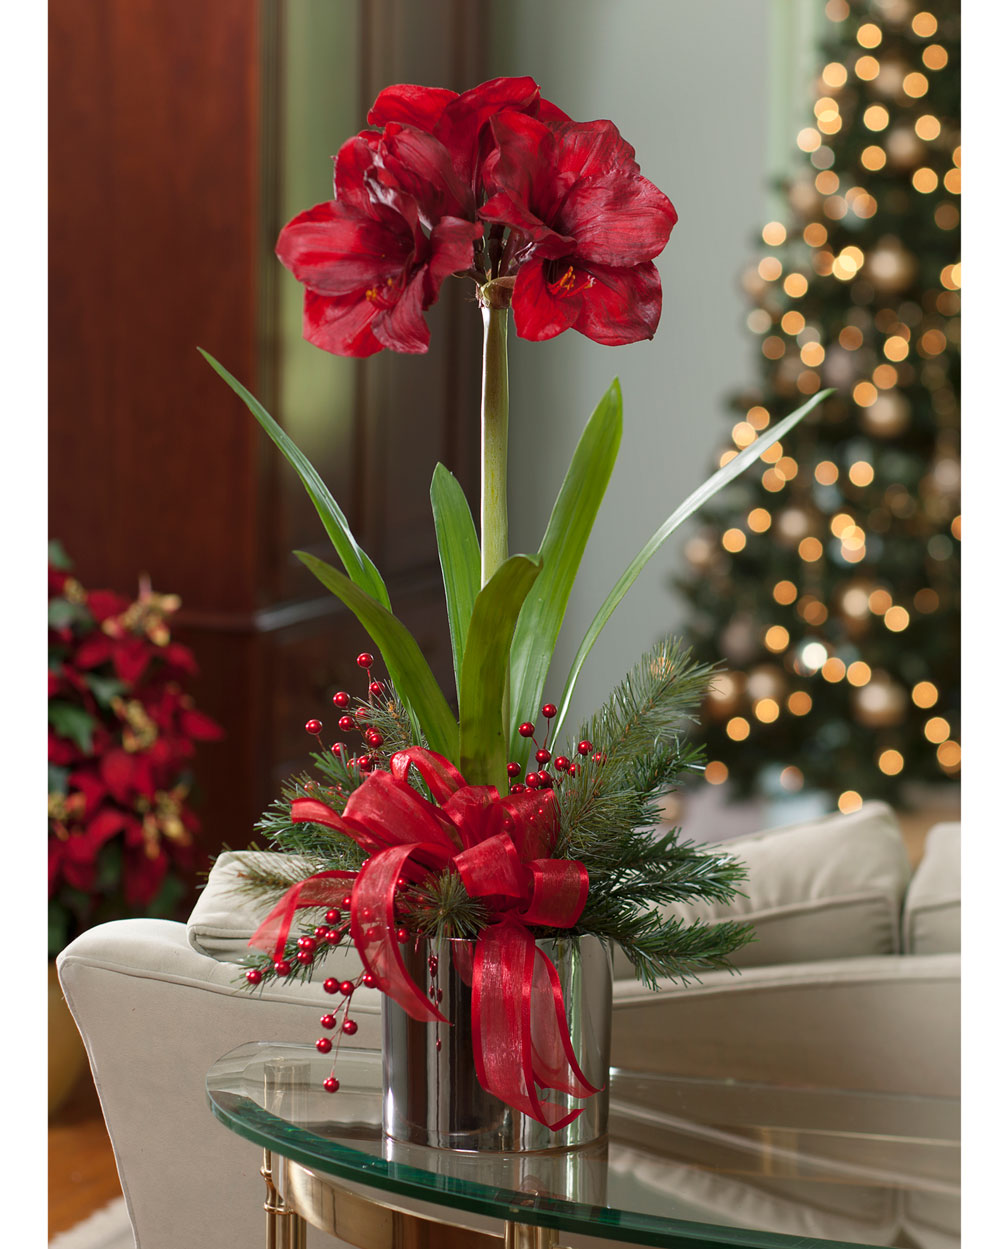 Top 10 Holiday Flowers